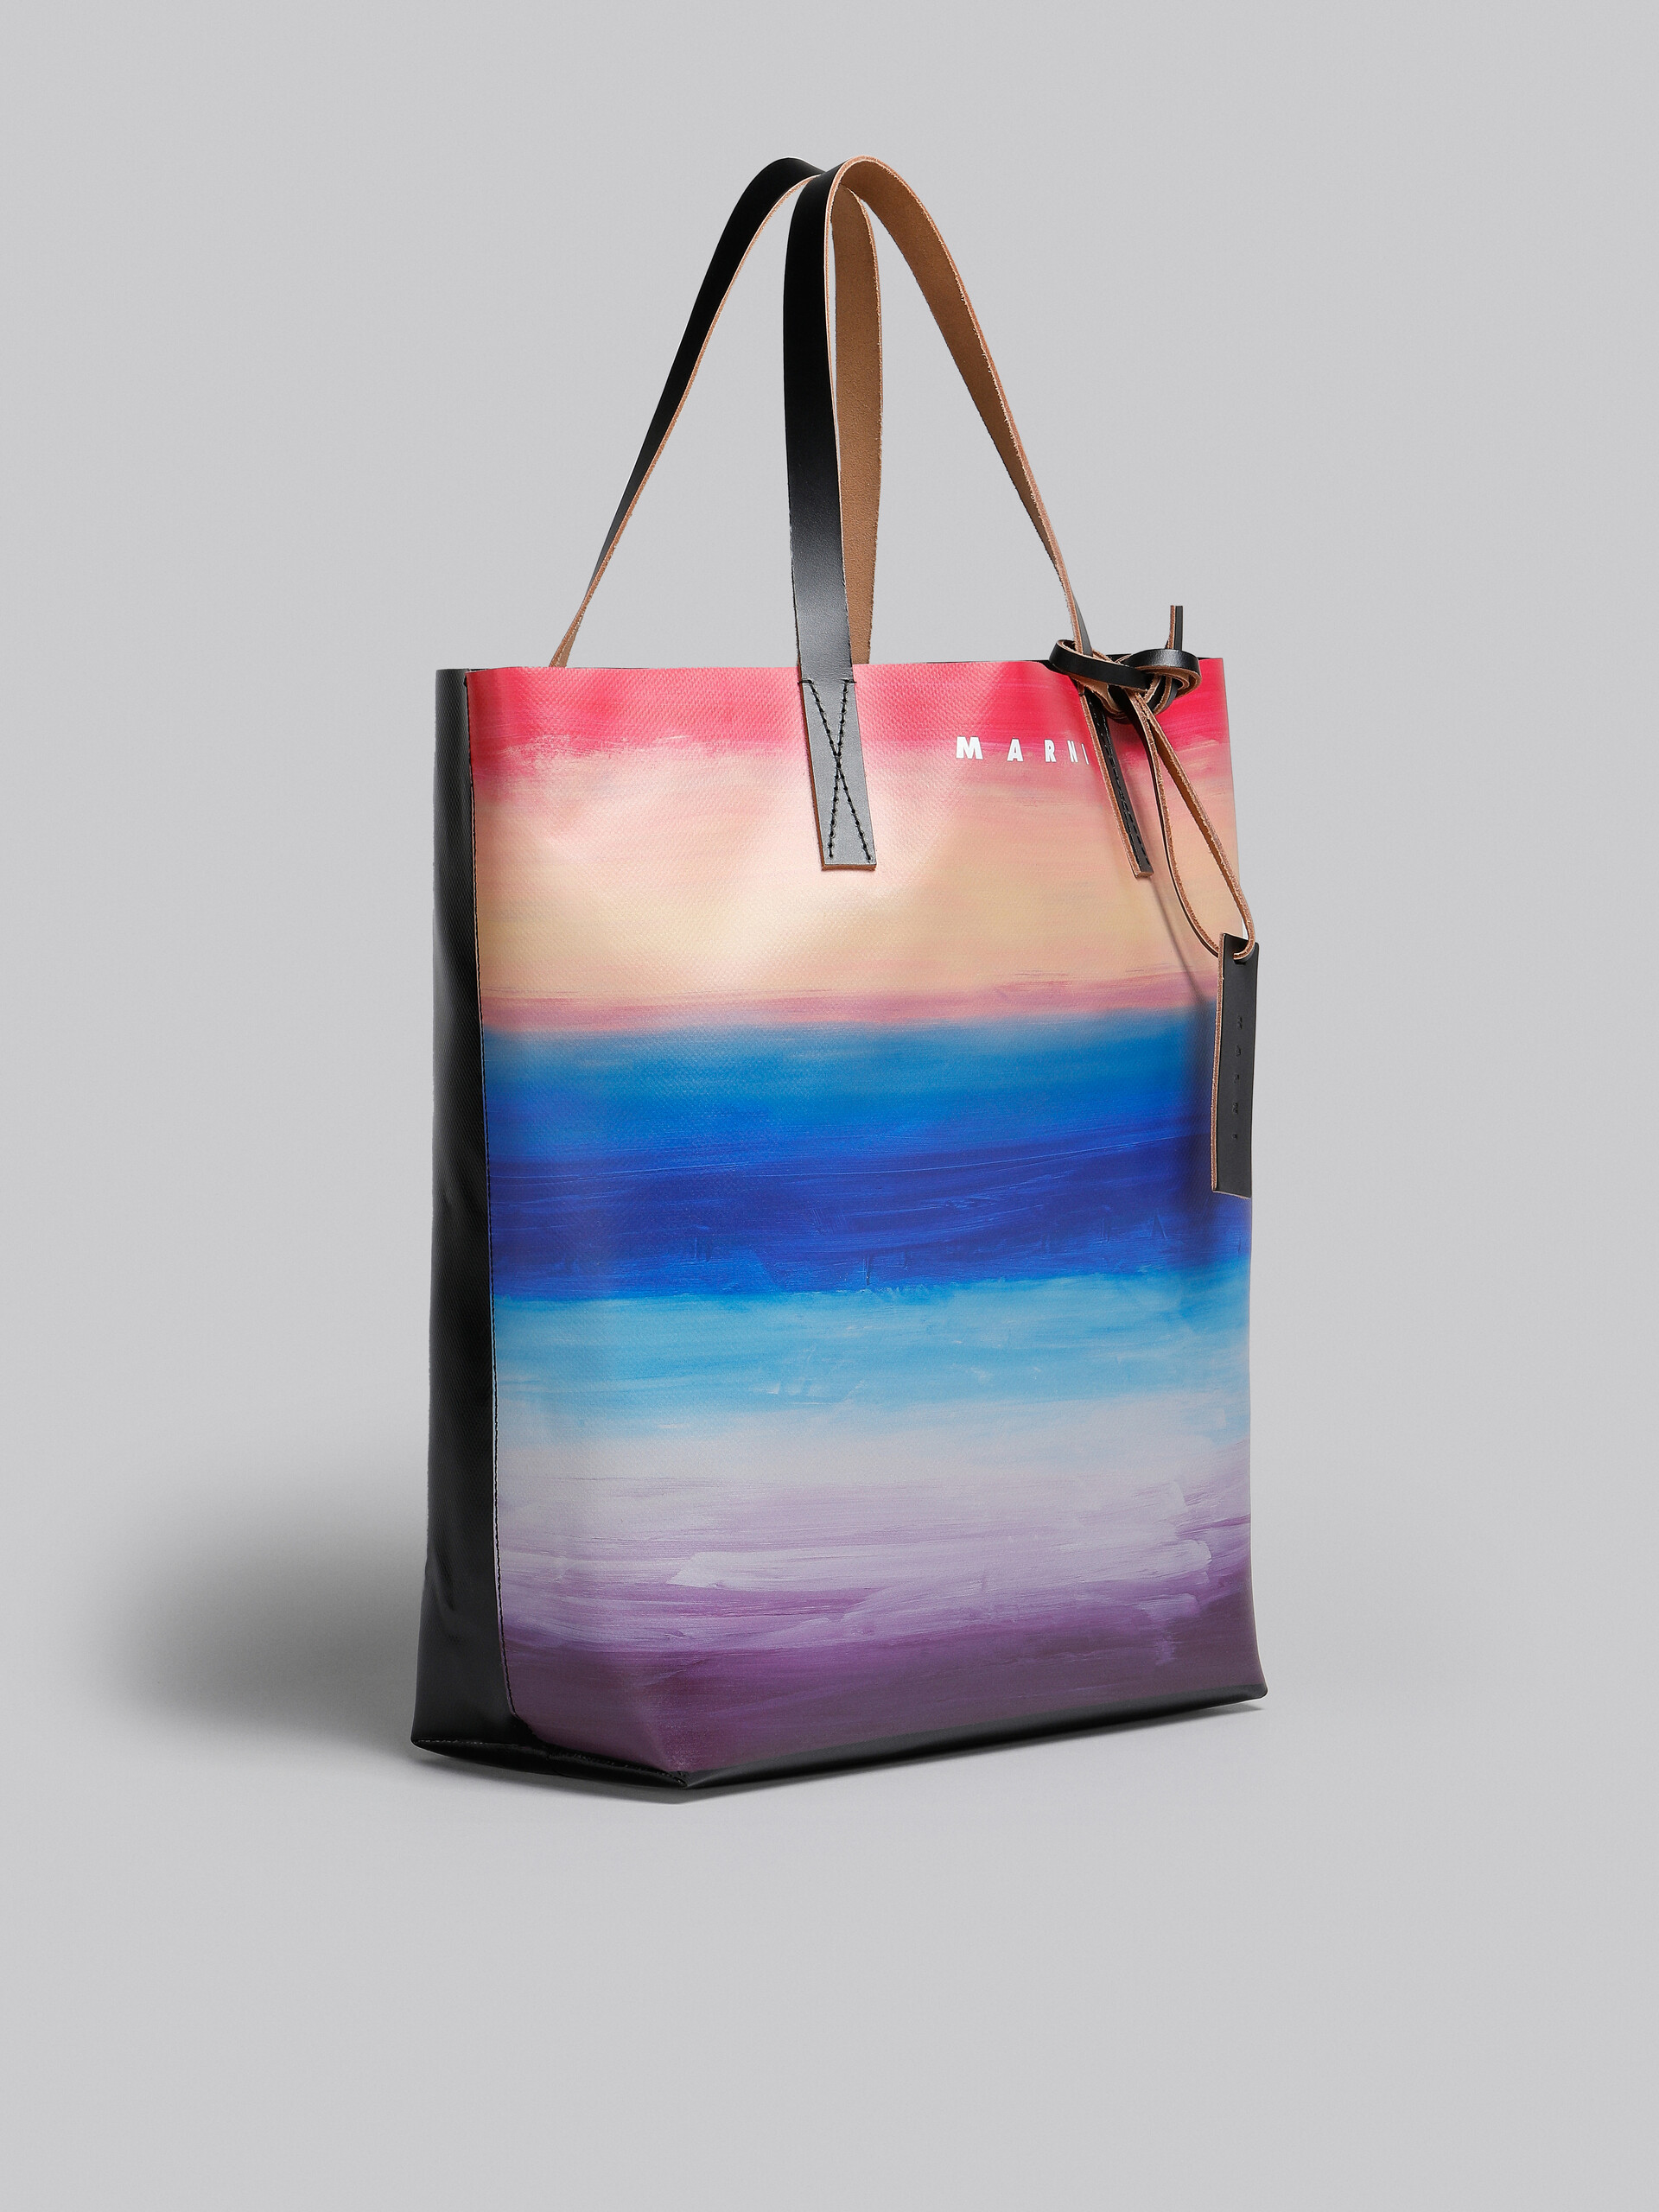 Tribeca shopping bag with Dark Side of the Moon print - Shopping Bags - Image 6